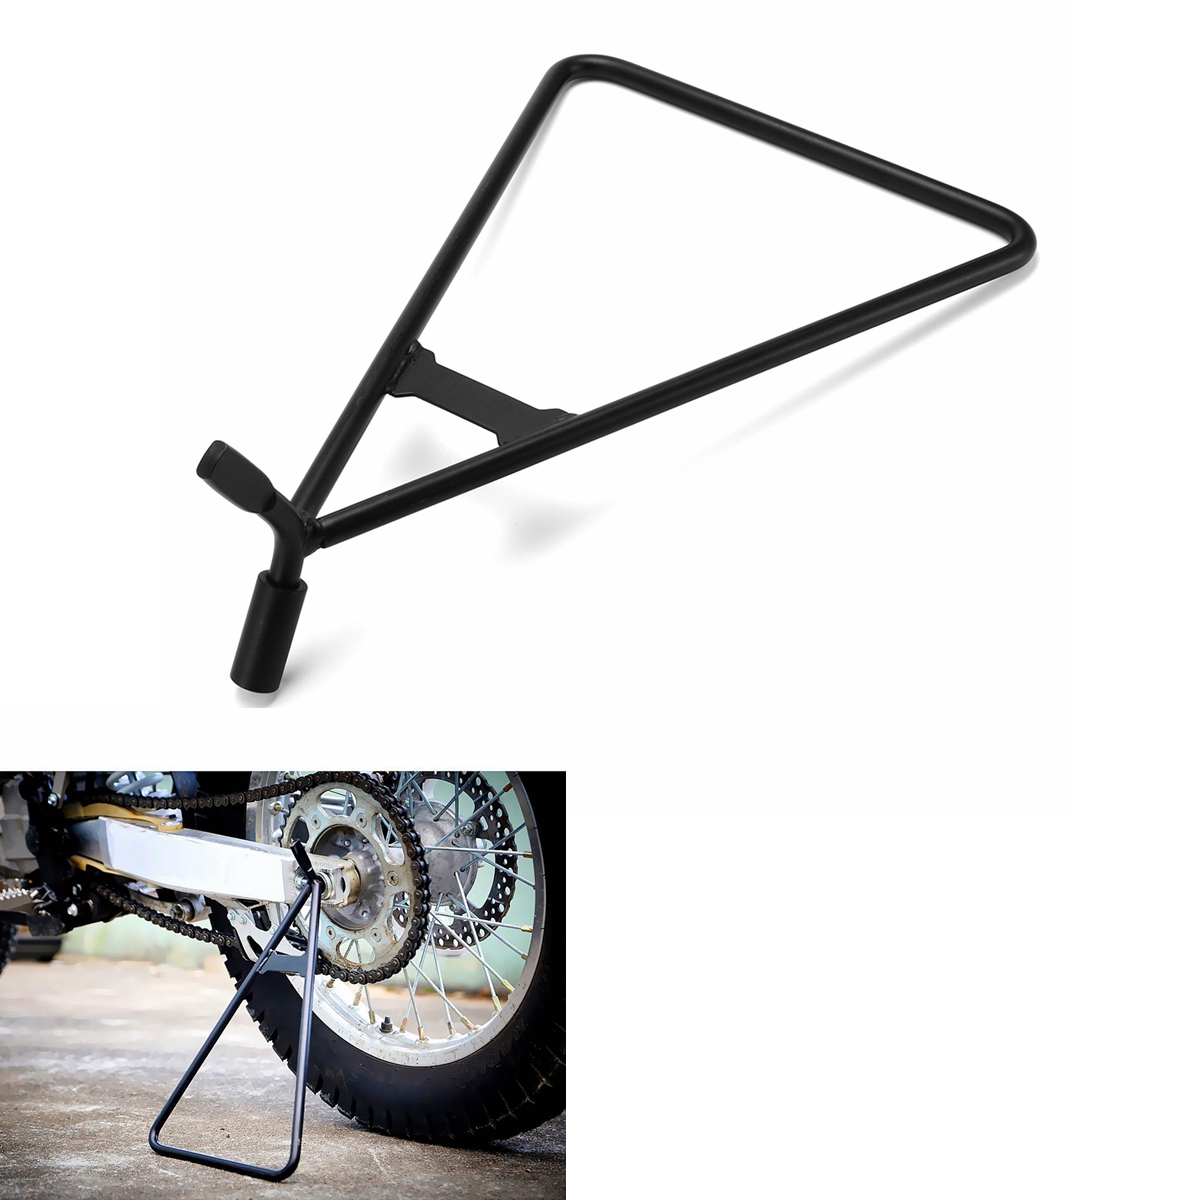 

Universal Motorcycle Triangle Side Stand Fit Dirt Bike MX Motocross Kickstand